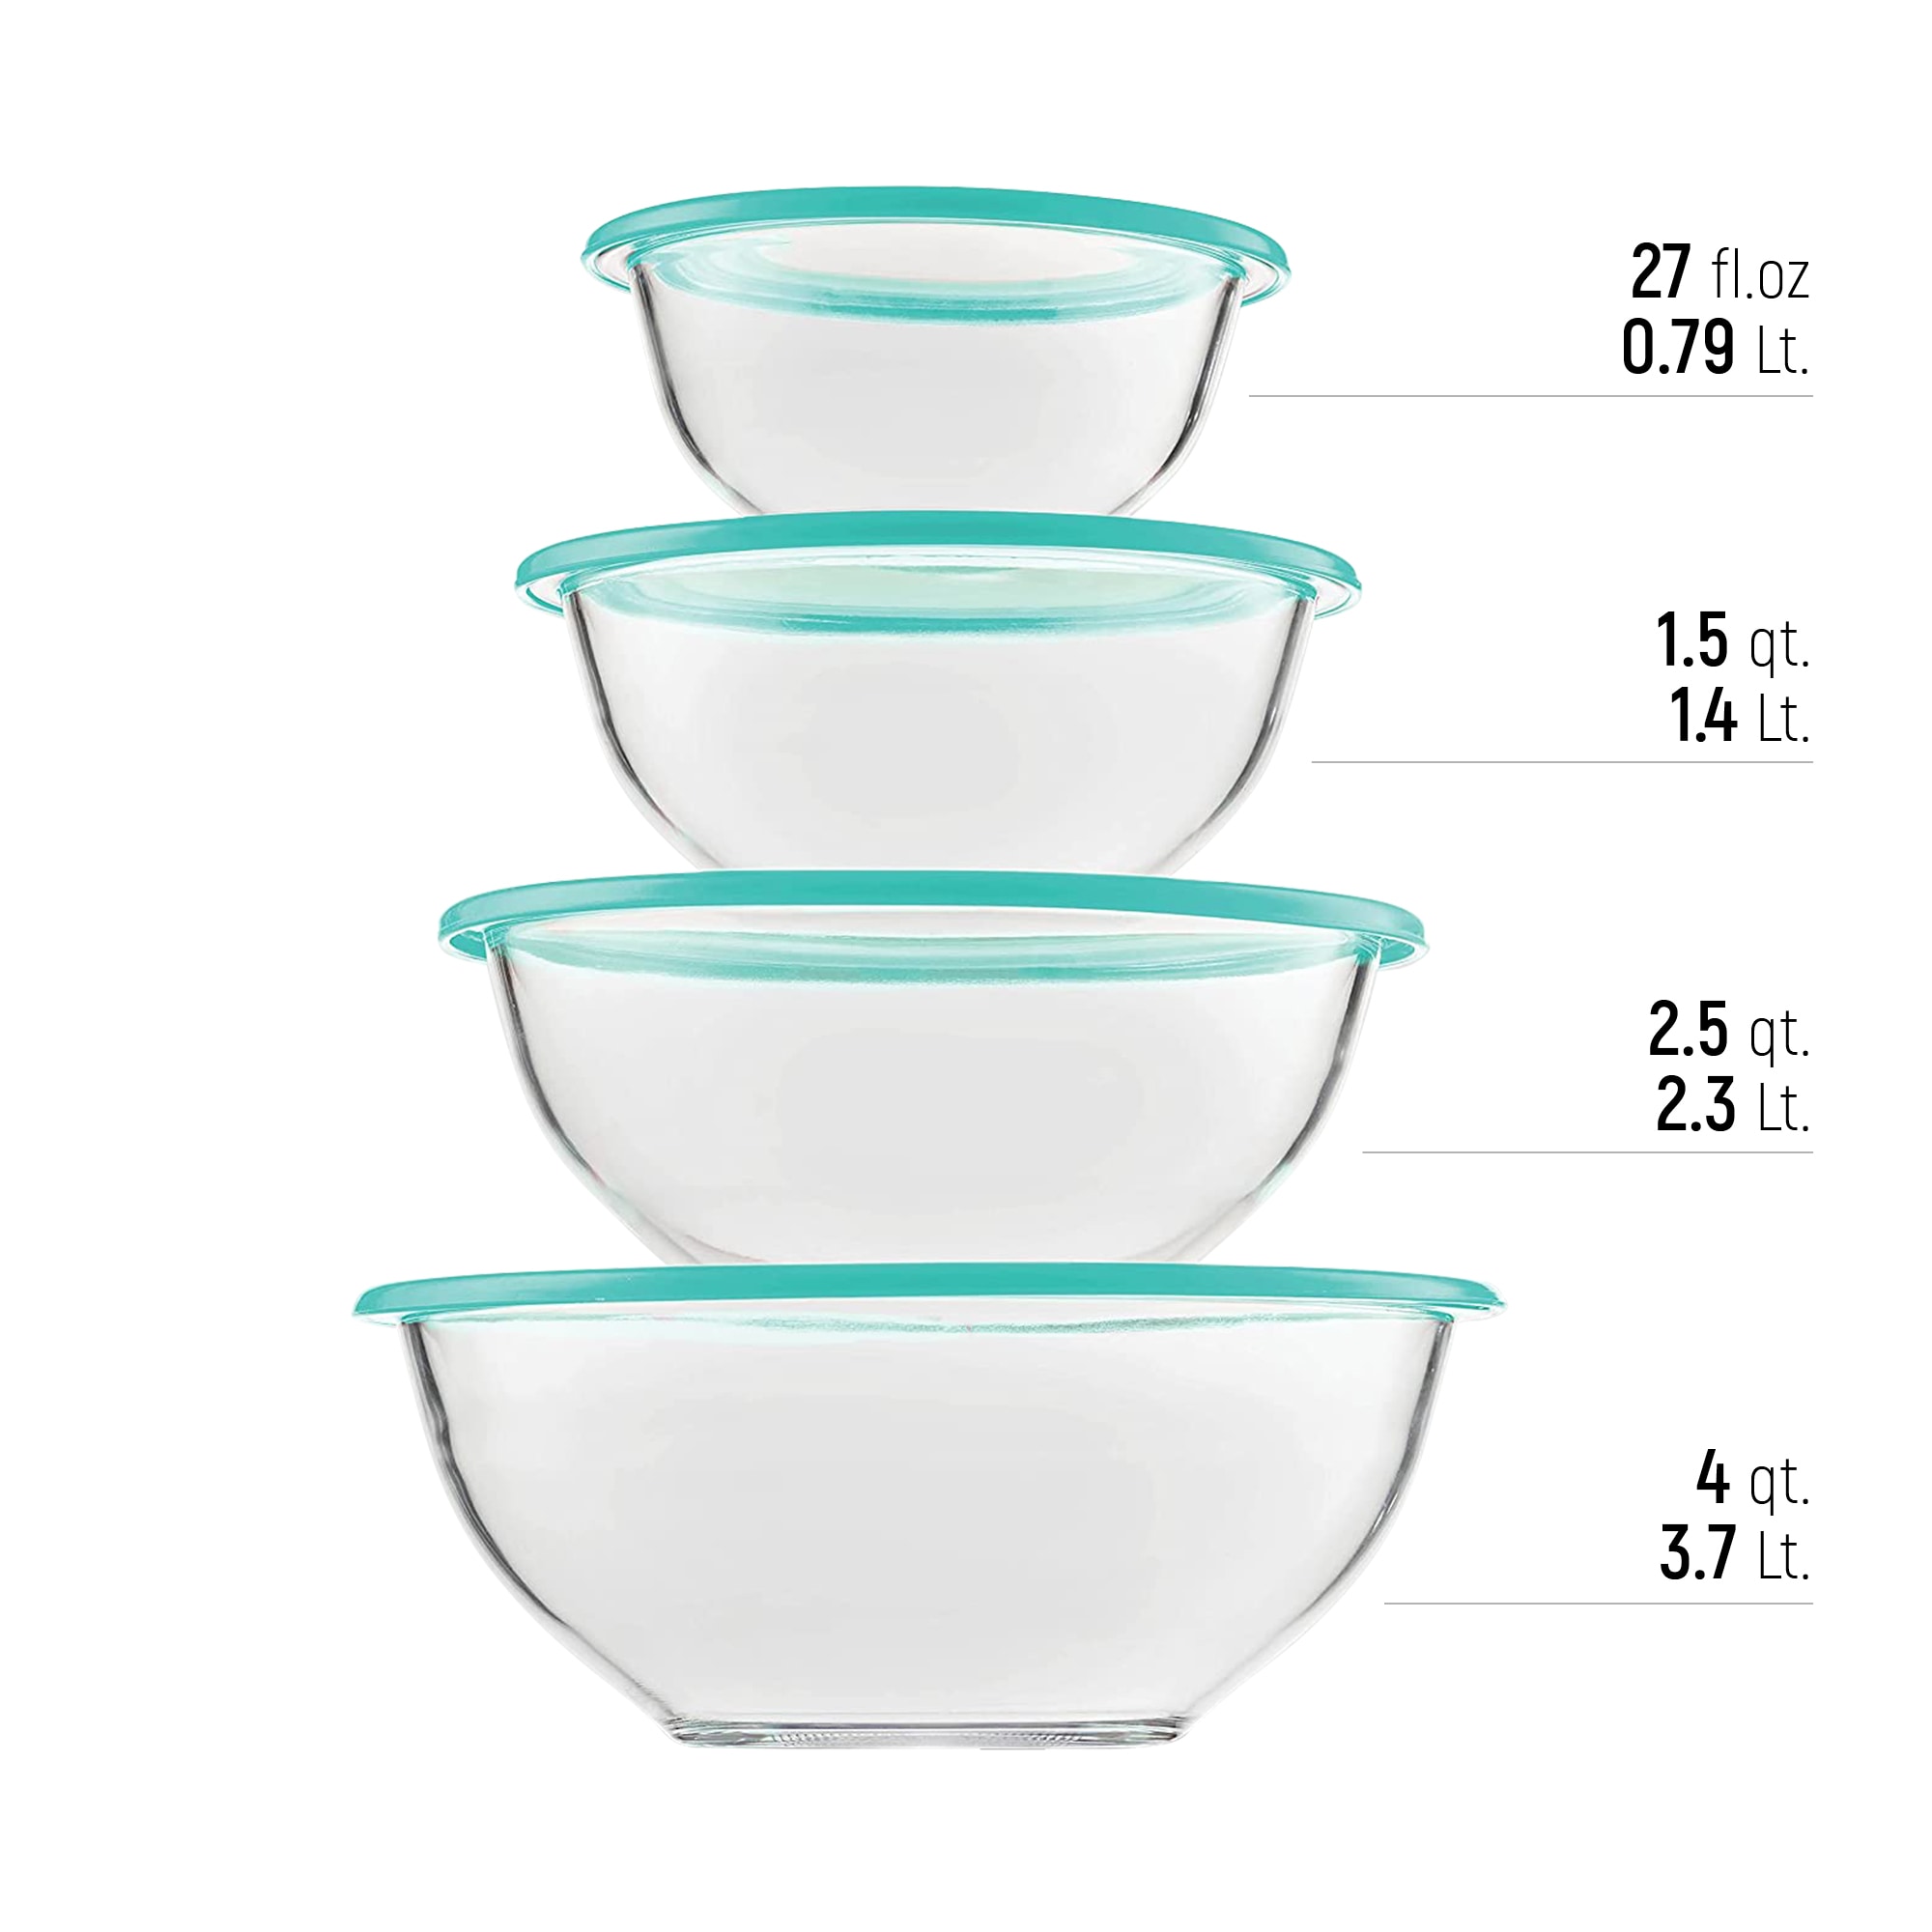 Pair of 1 Liter Pyrex Clear Tempered Glass Mixing Bowls Kitchen